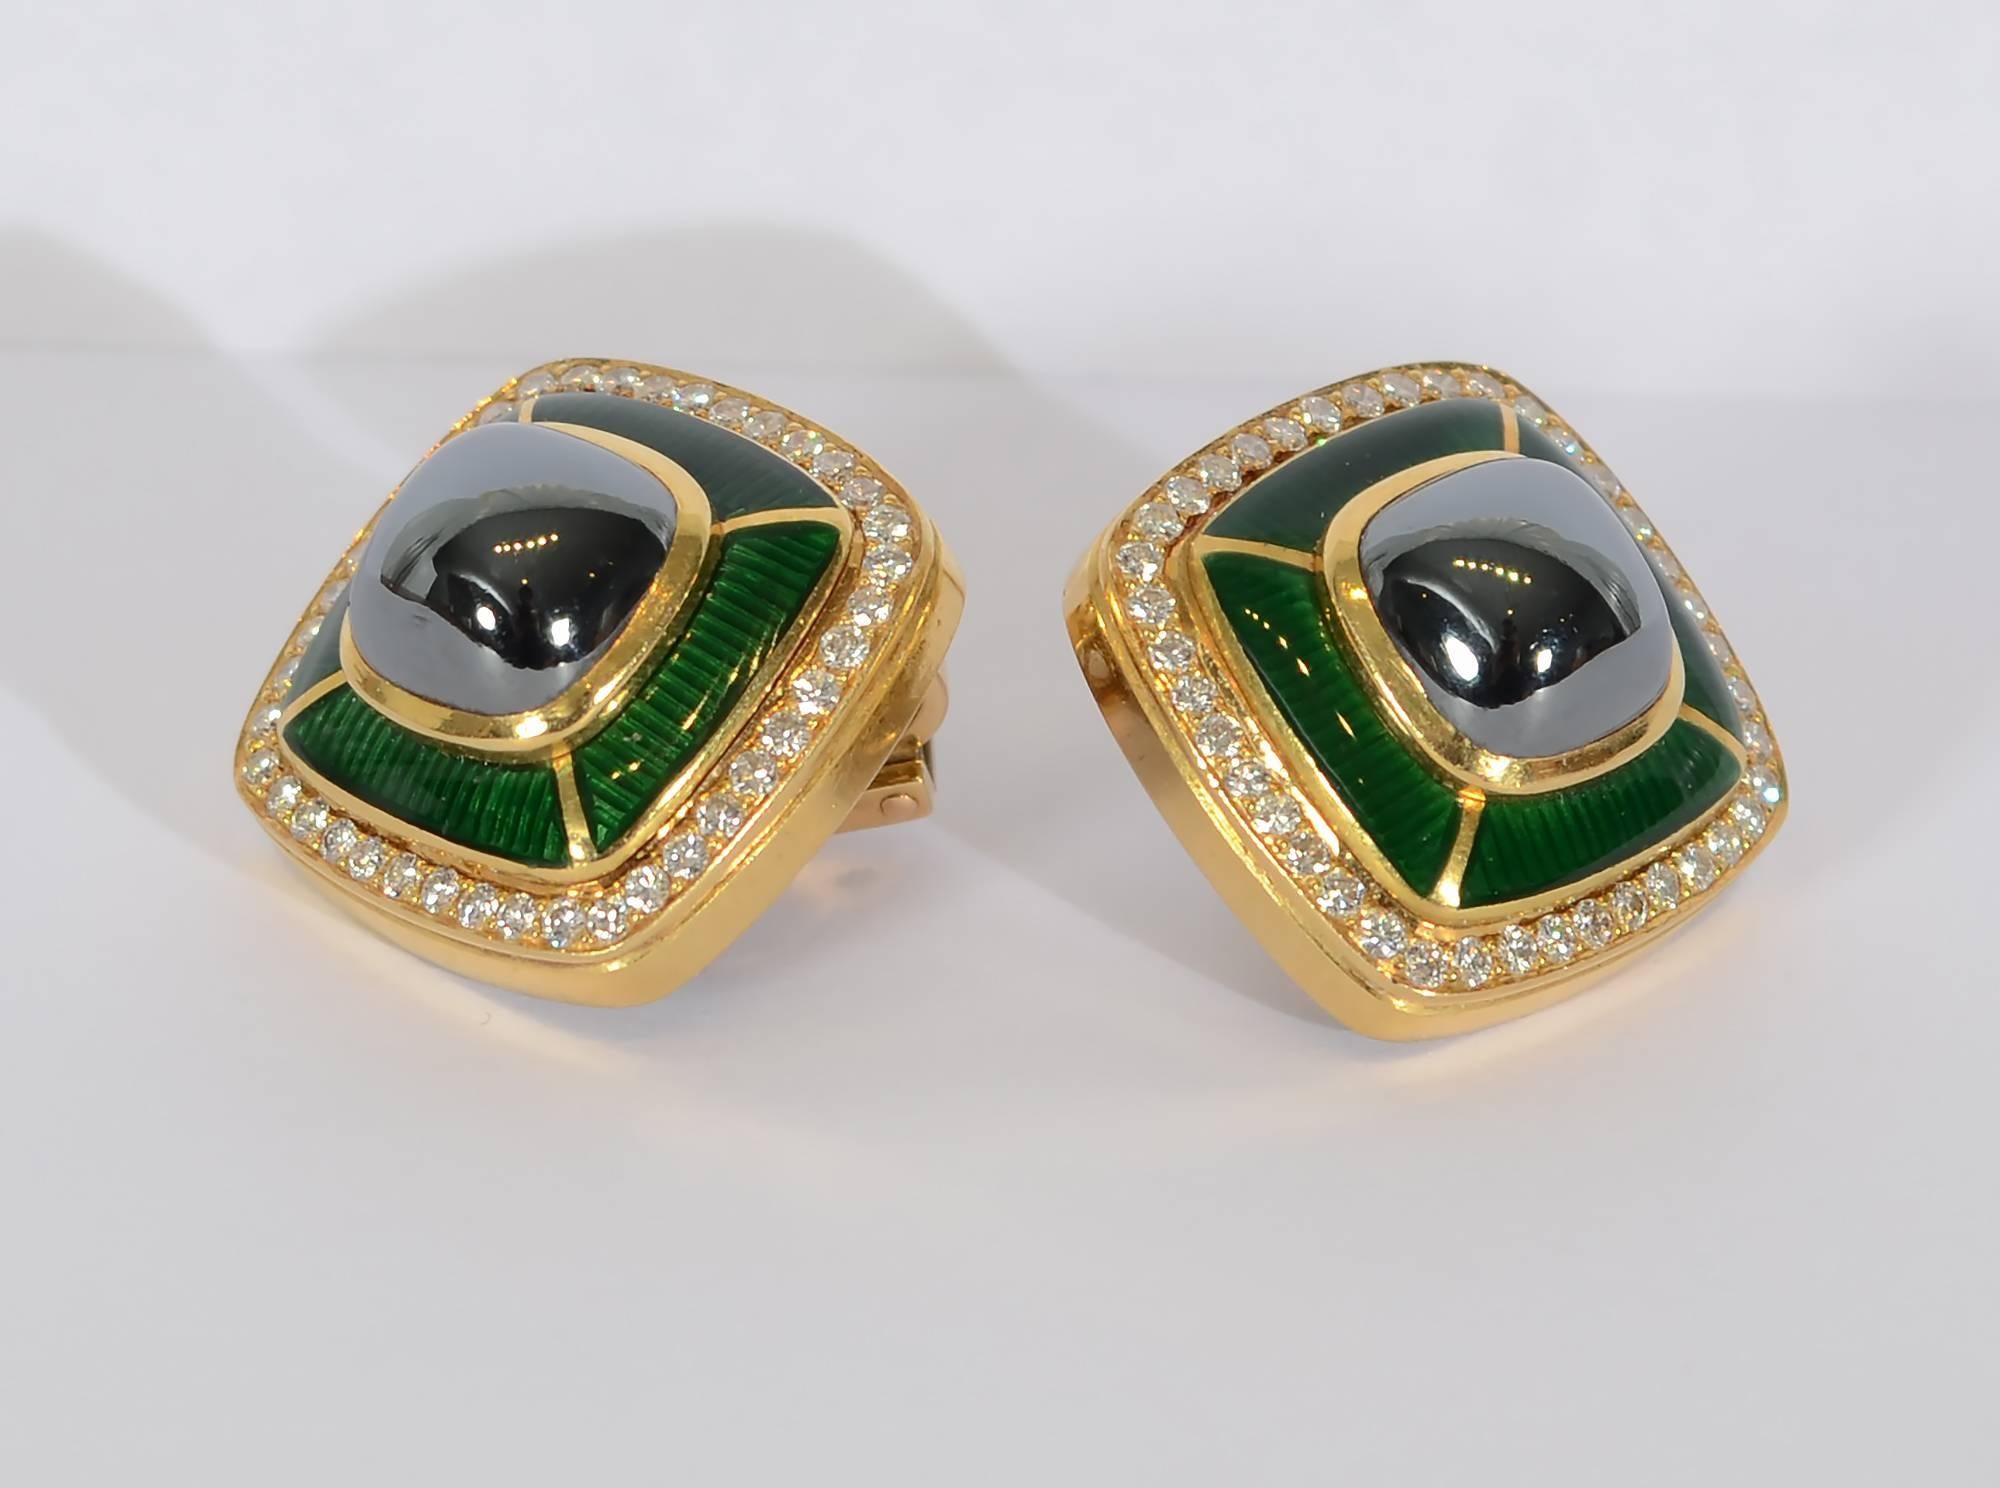 Sophisticated and elegant Tiffany earrings with a hematite center surrounded by green enamel and diamonds. The green and gray are an unusual, very wearable color combination.The earrings measure 1